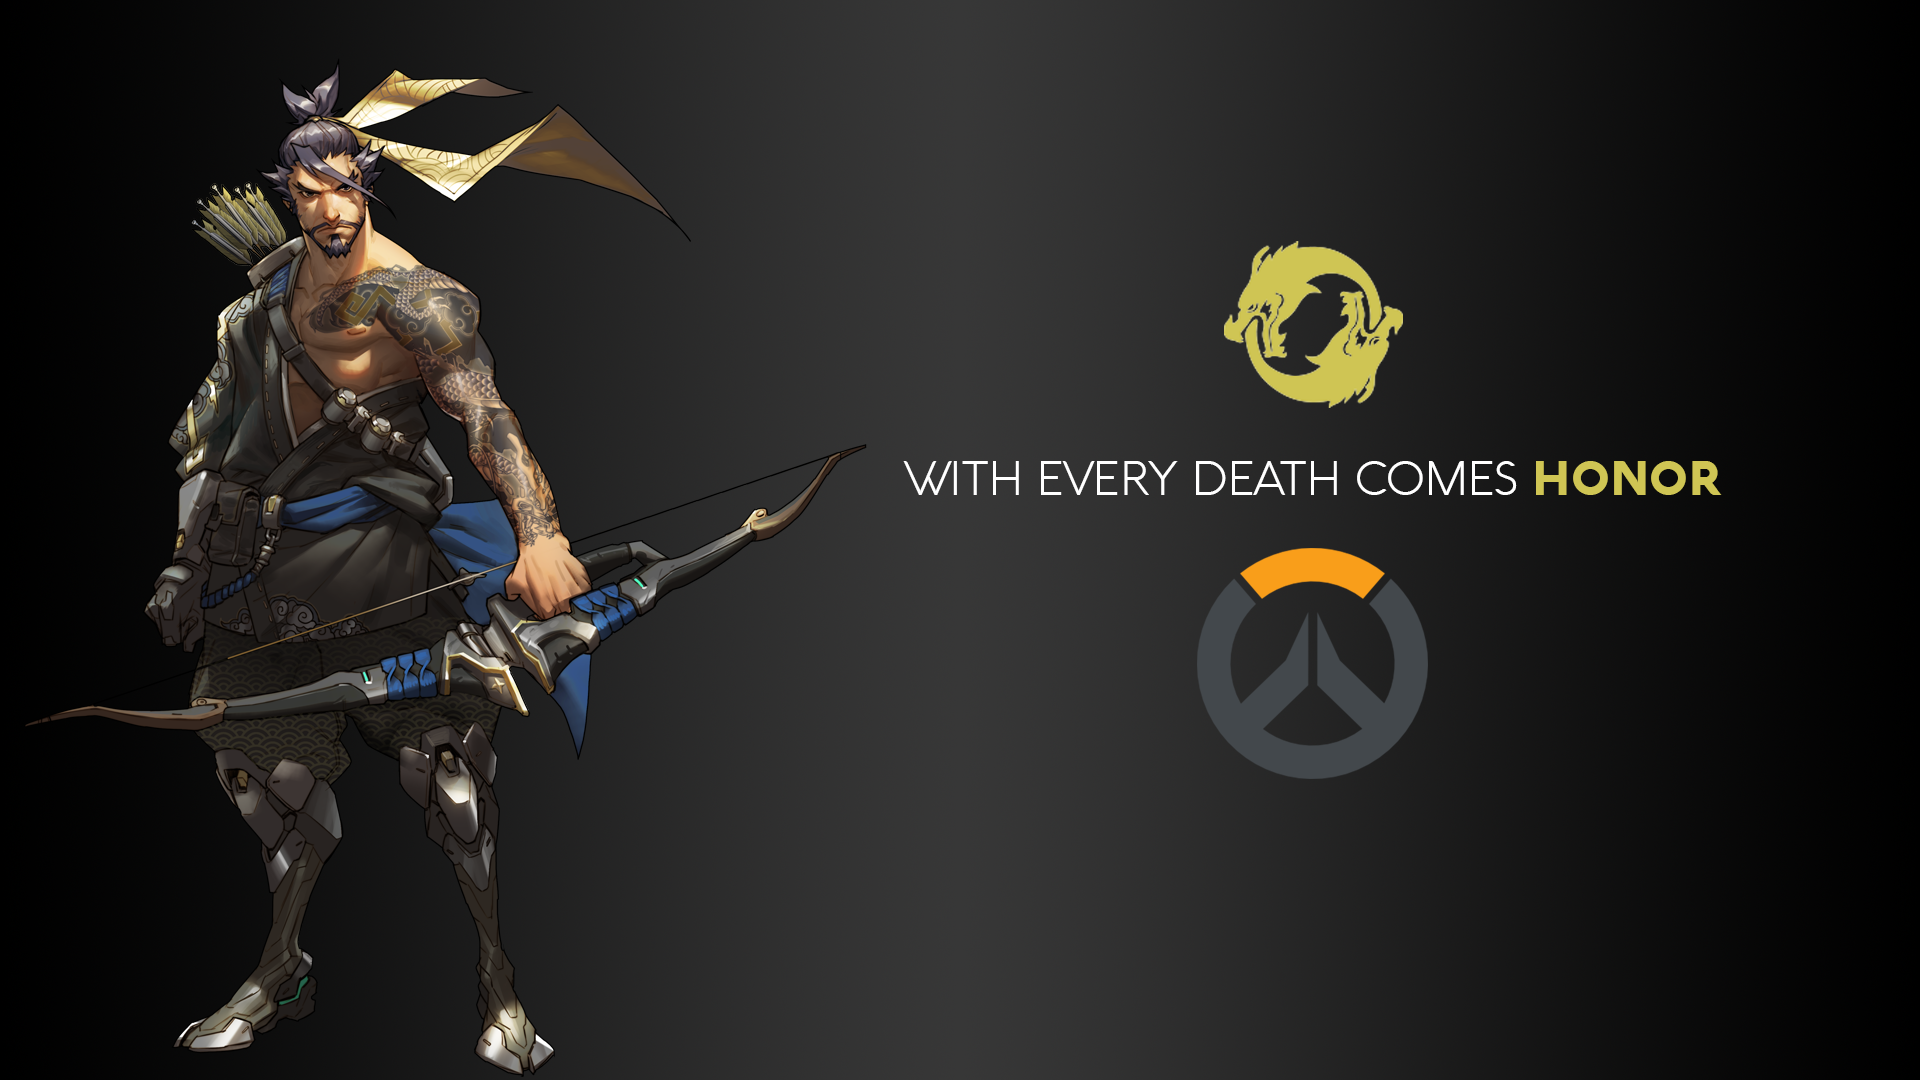 General 1920x1080 Blizzard Entertainment Overwatch video games logo DXHHH101 (Author) Hanzo (Overwatch) video game characters inked men video game men men bow and arrow dark background PC gaming